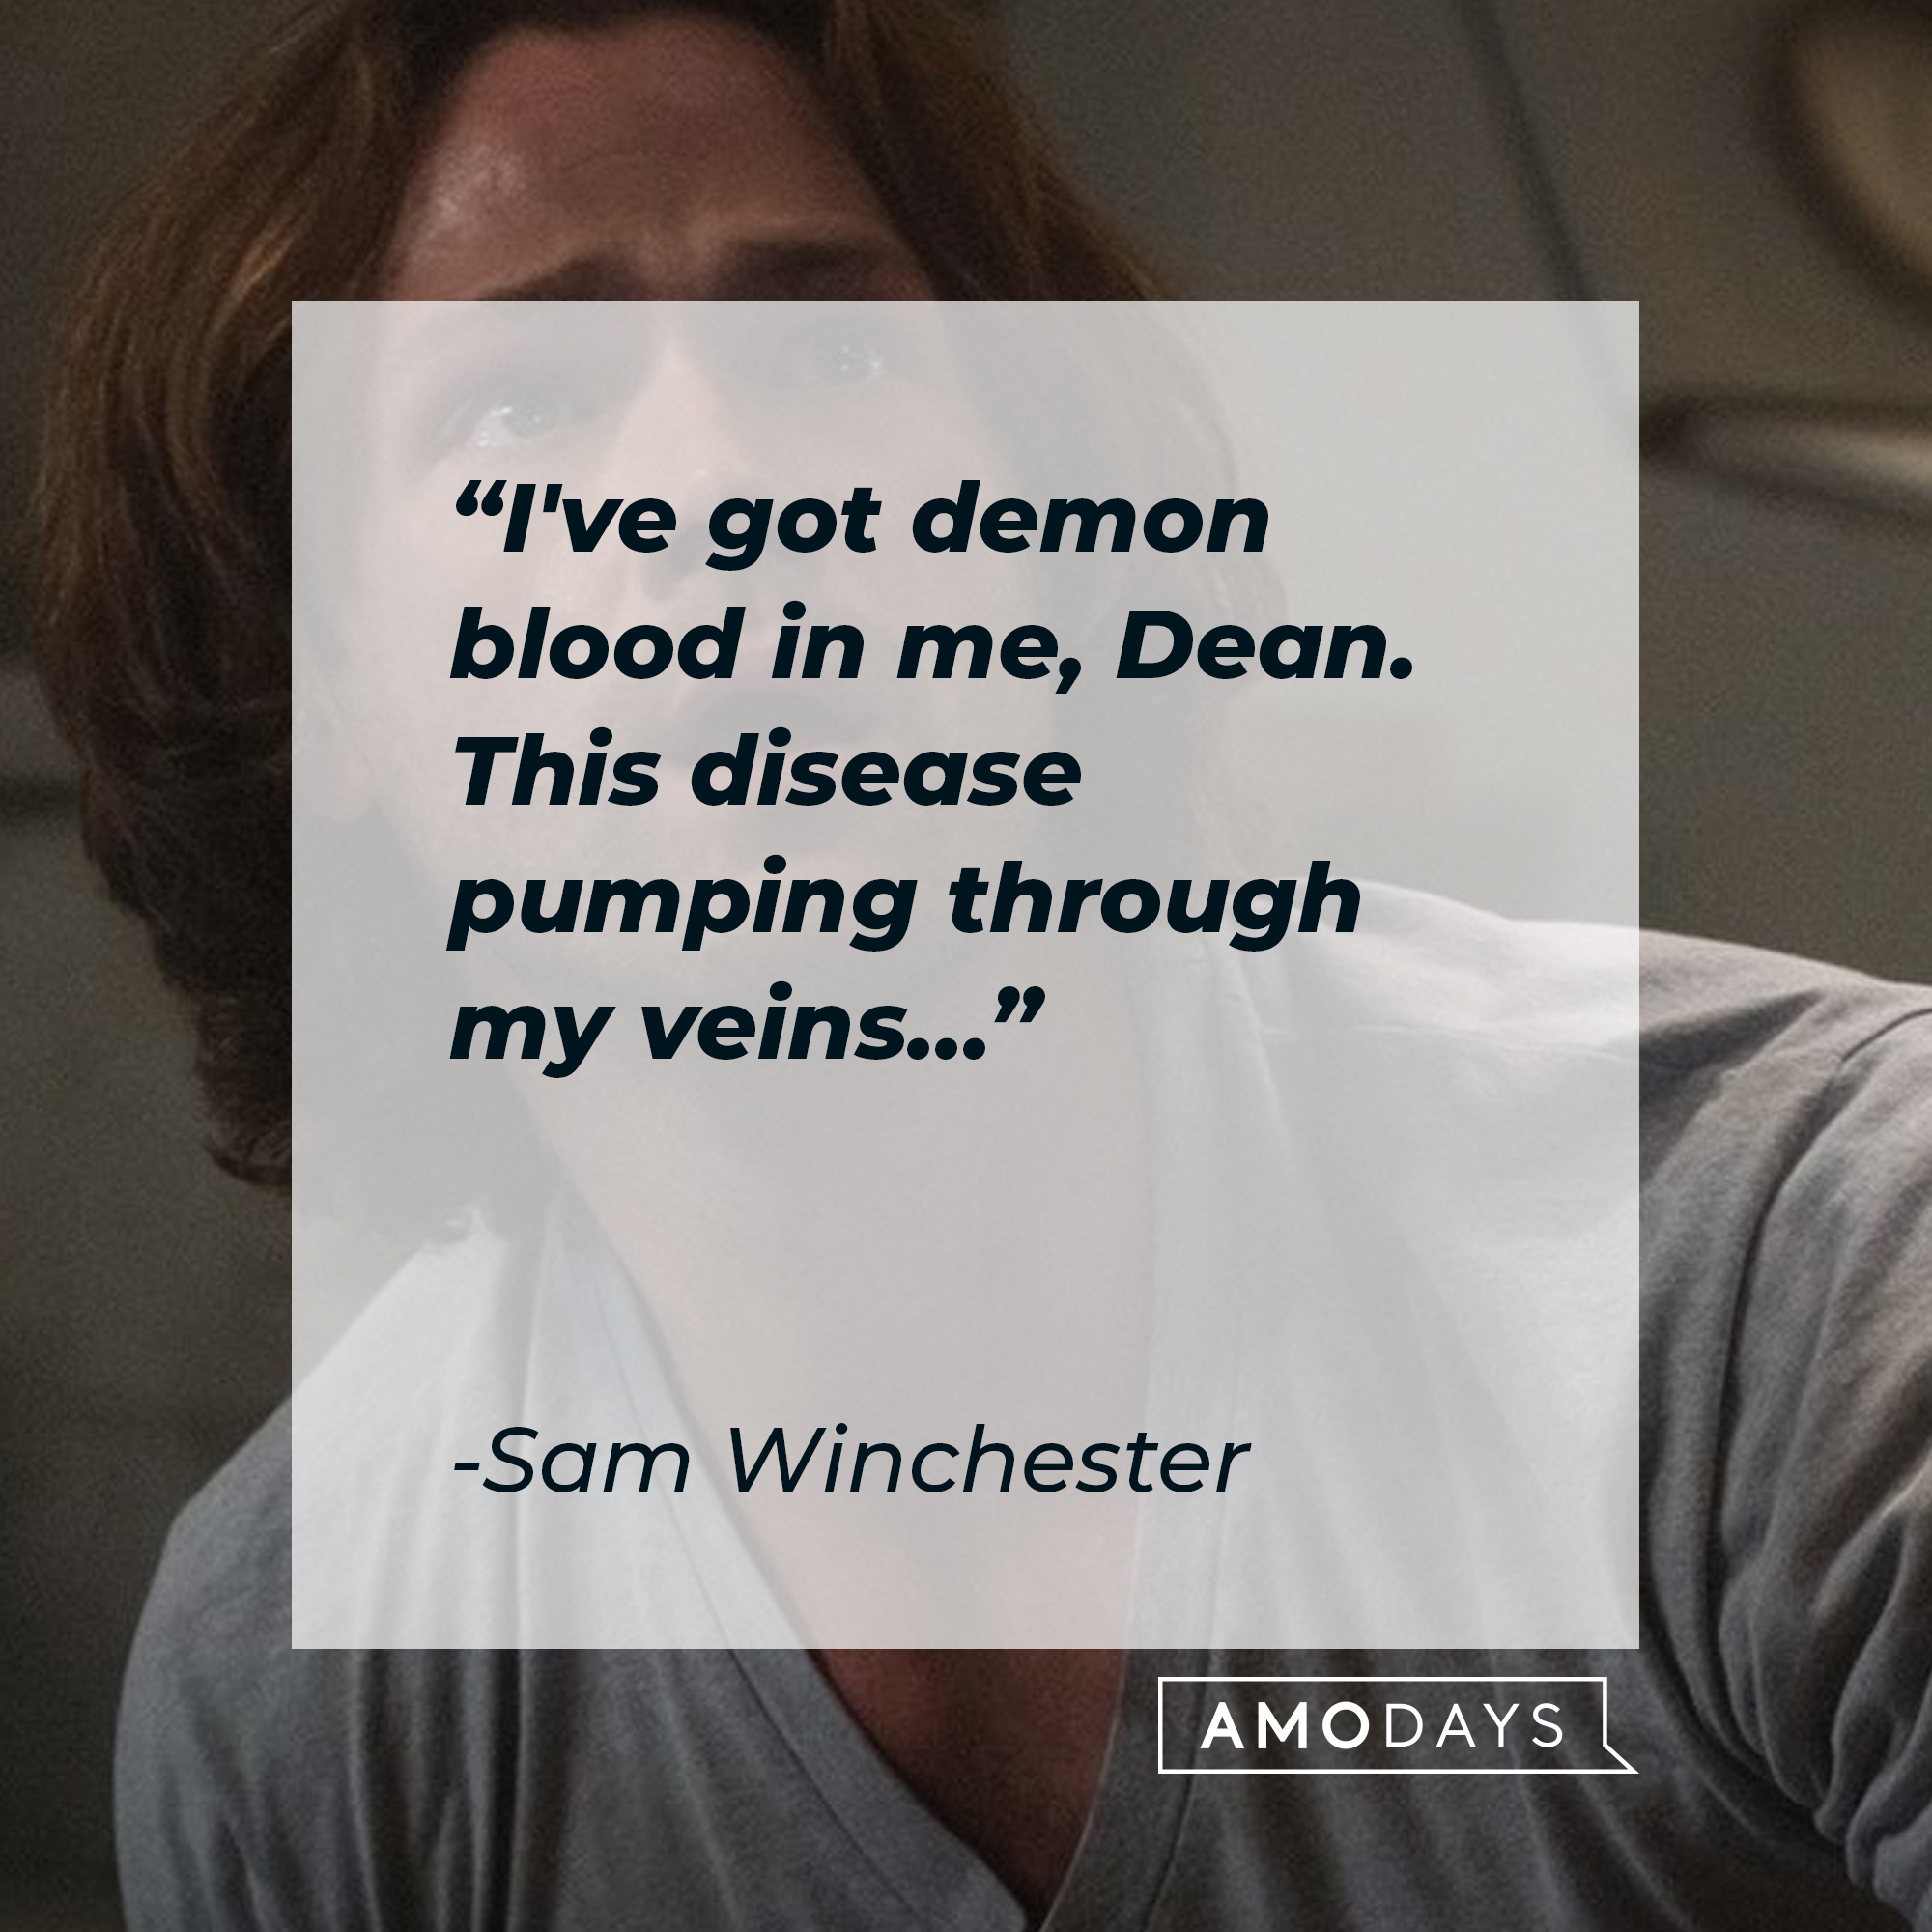 Sam Winchester, with his quote: "I've got demon blood in me, Dean. This disease Pumping through my veins…” | Source: Facebook.com/Supernatural